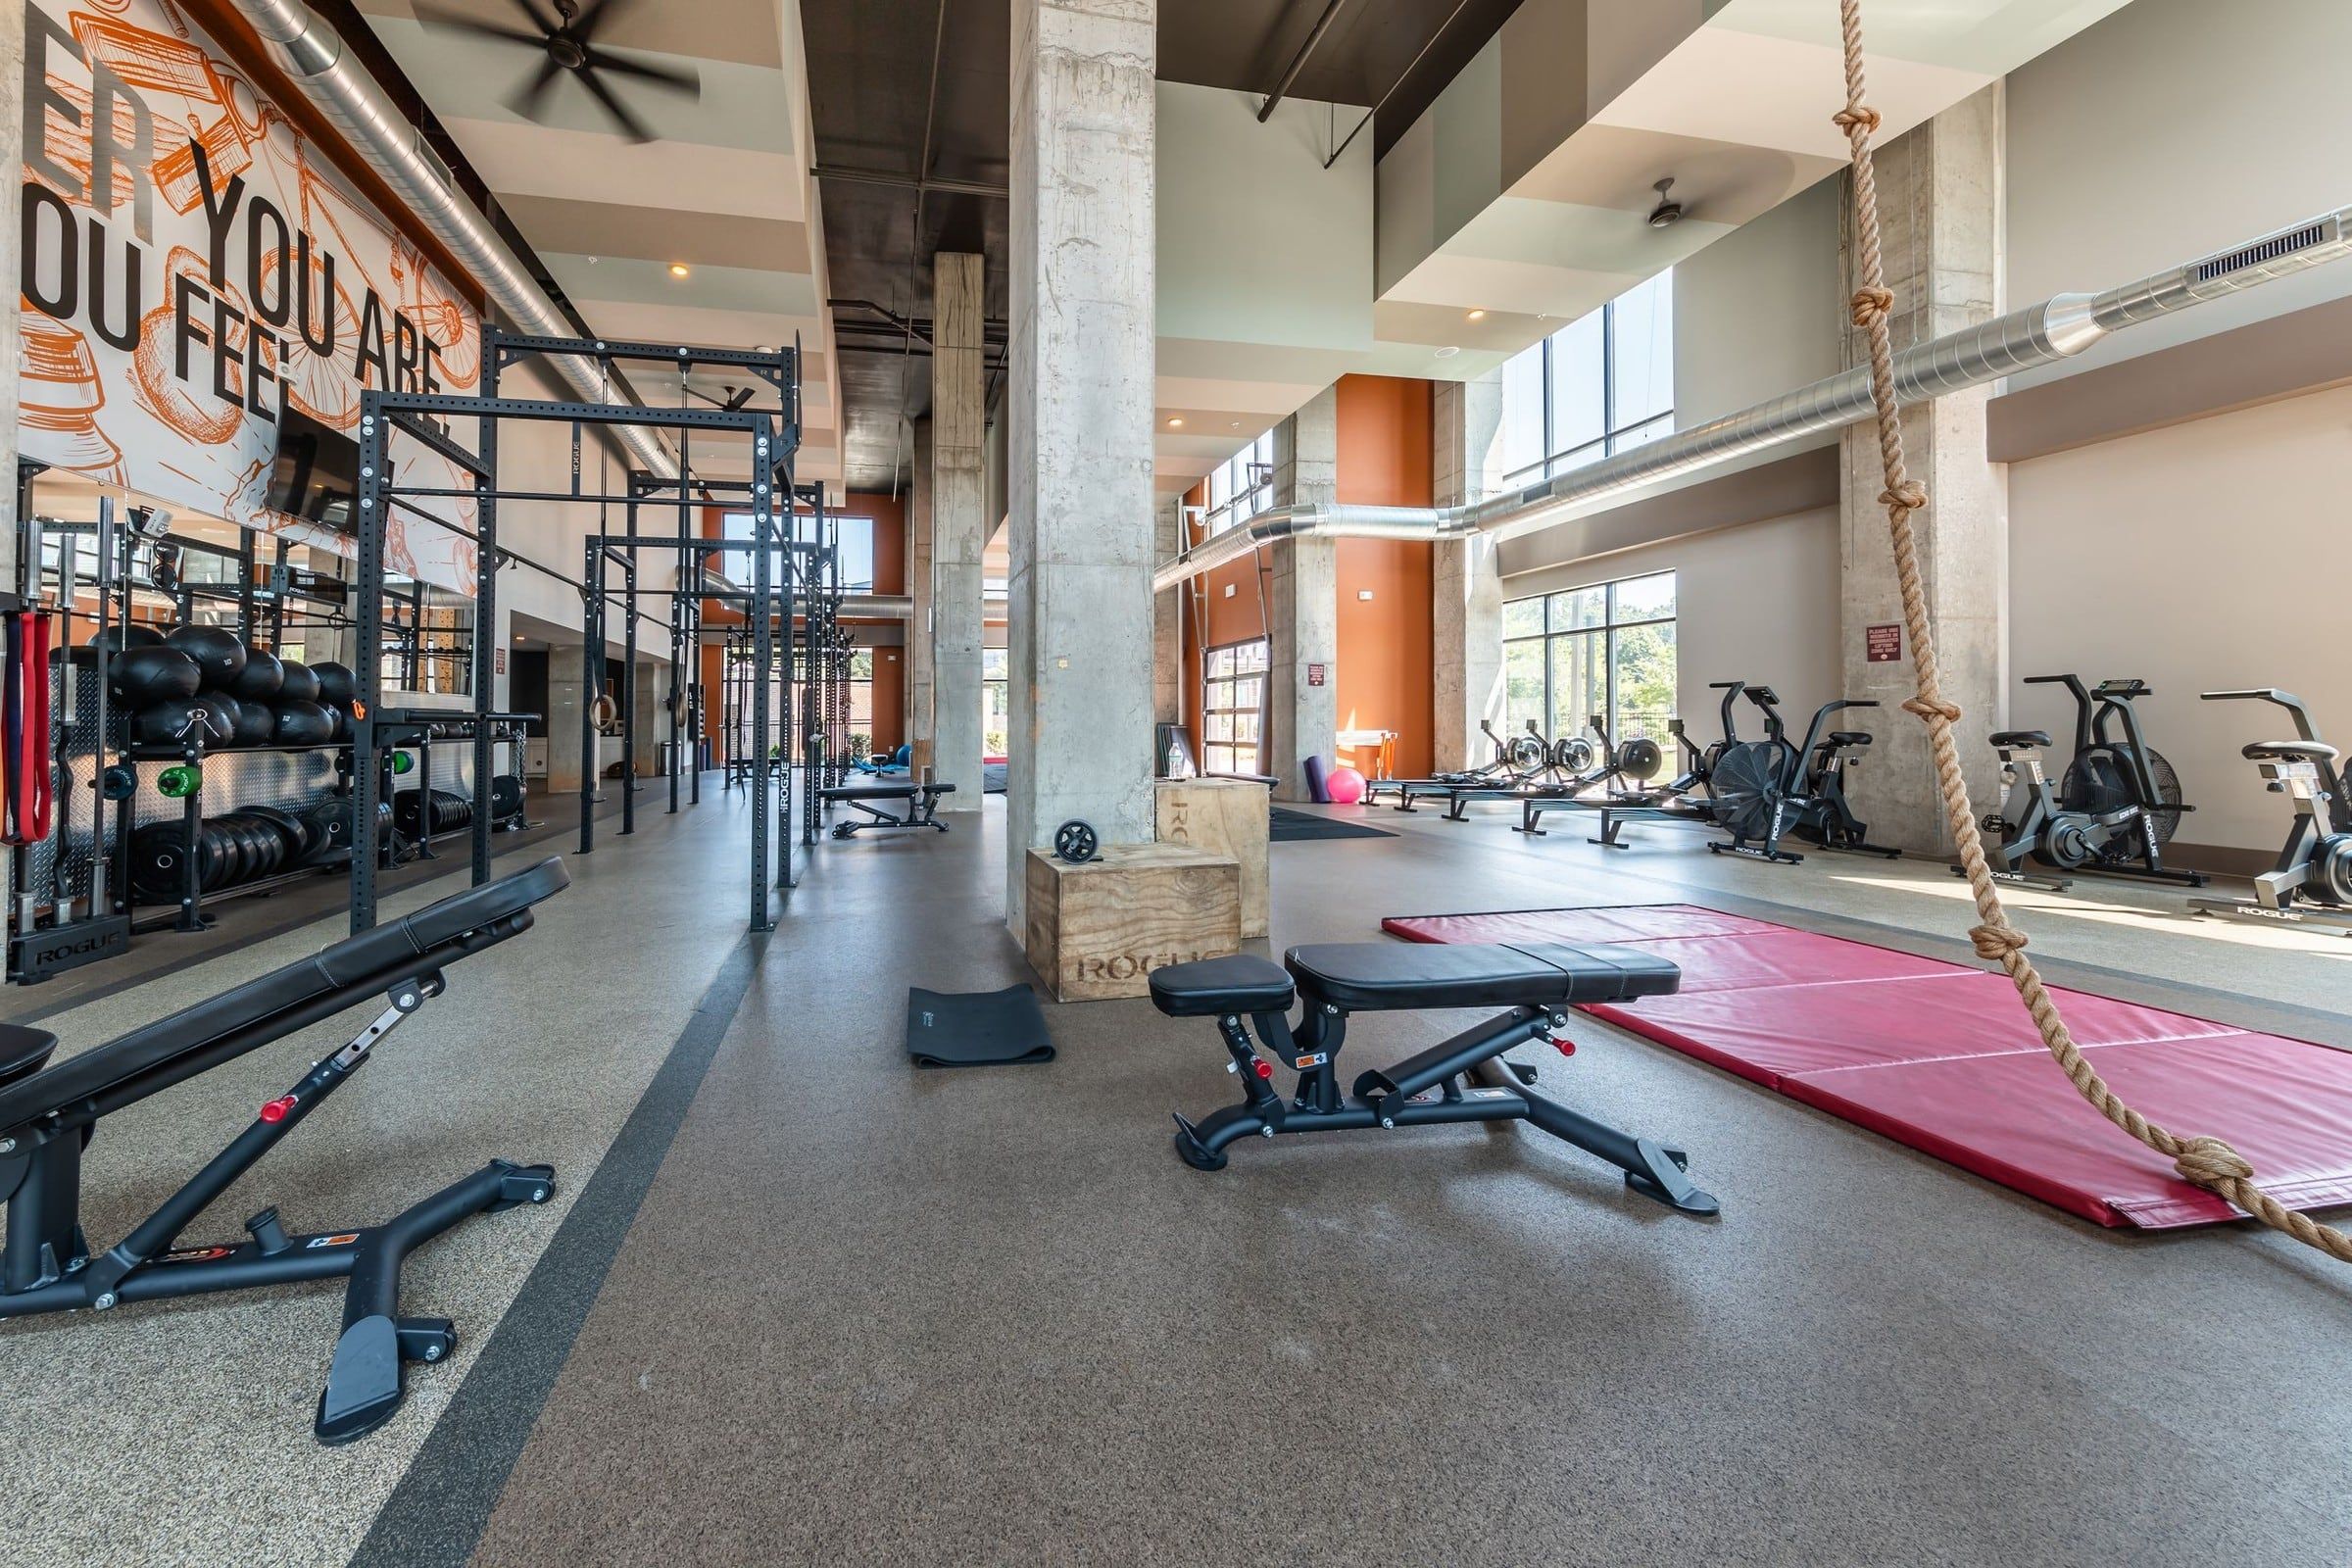 The Village at Commonwealth fitness center with climbing ropes, benches, squat racks, and more